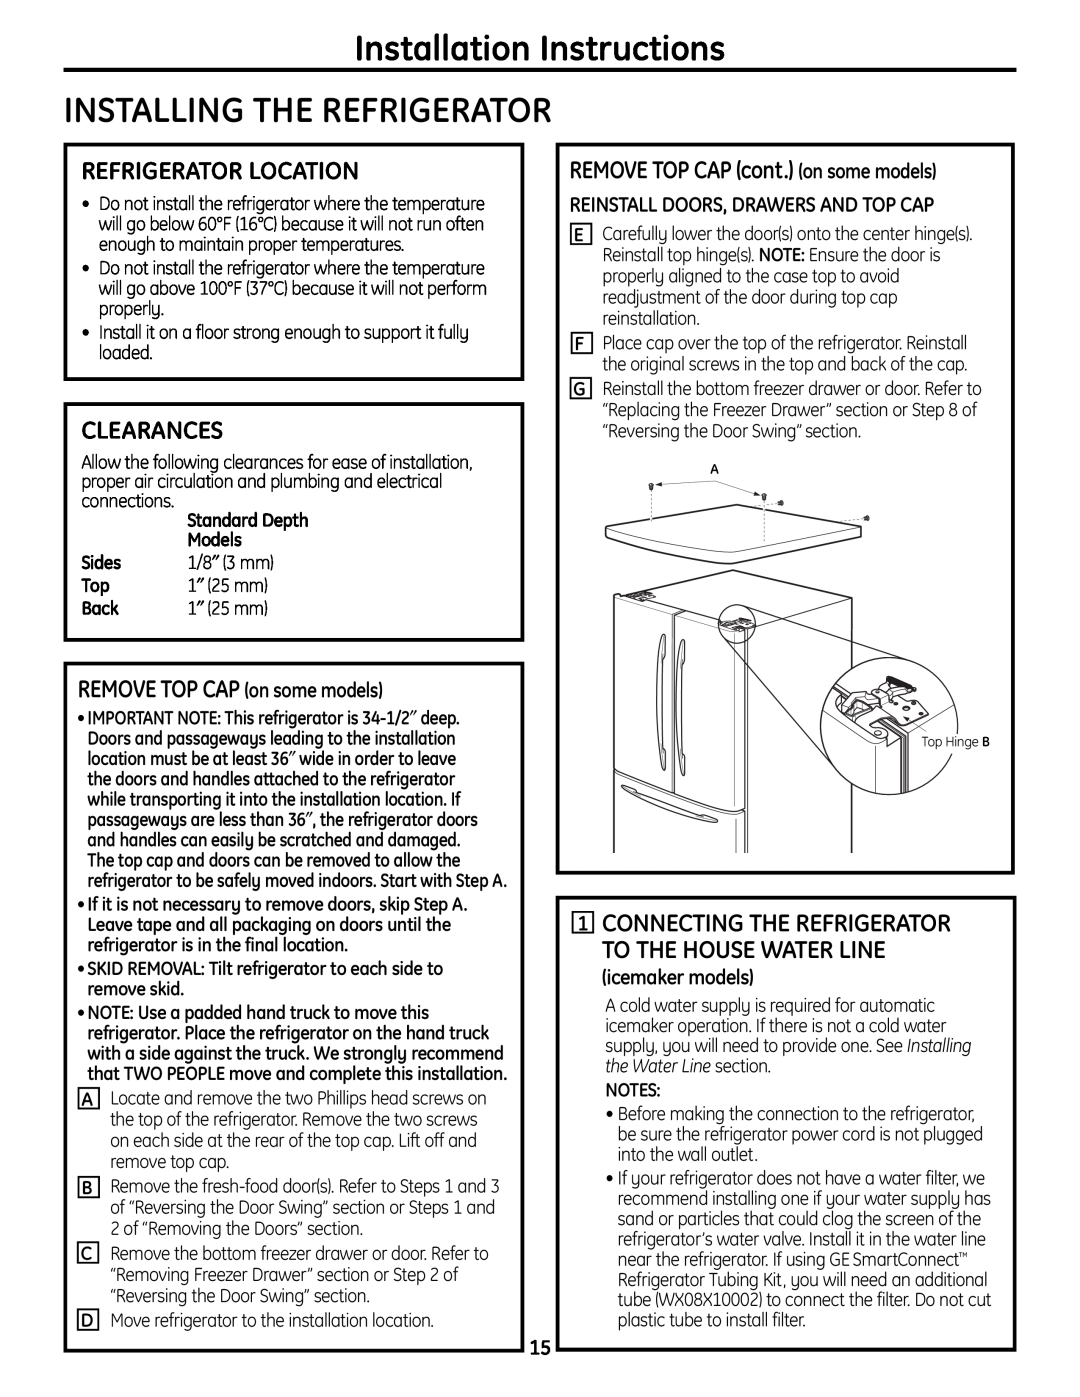 GE 200D9366P004 Installation Instructions INSTALLING THE REFRIGERATOR, Refrigerator Location, Clearances, icemaker models 